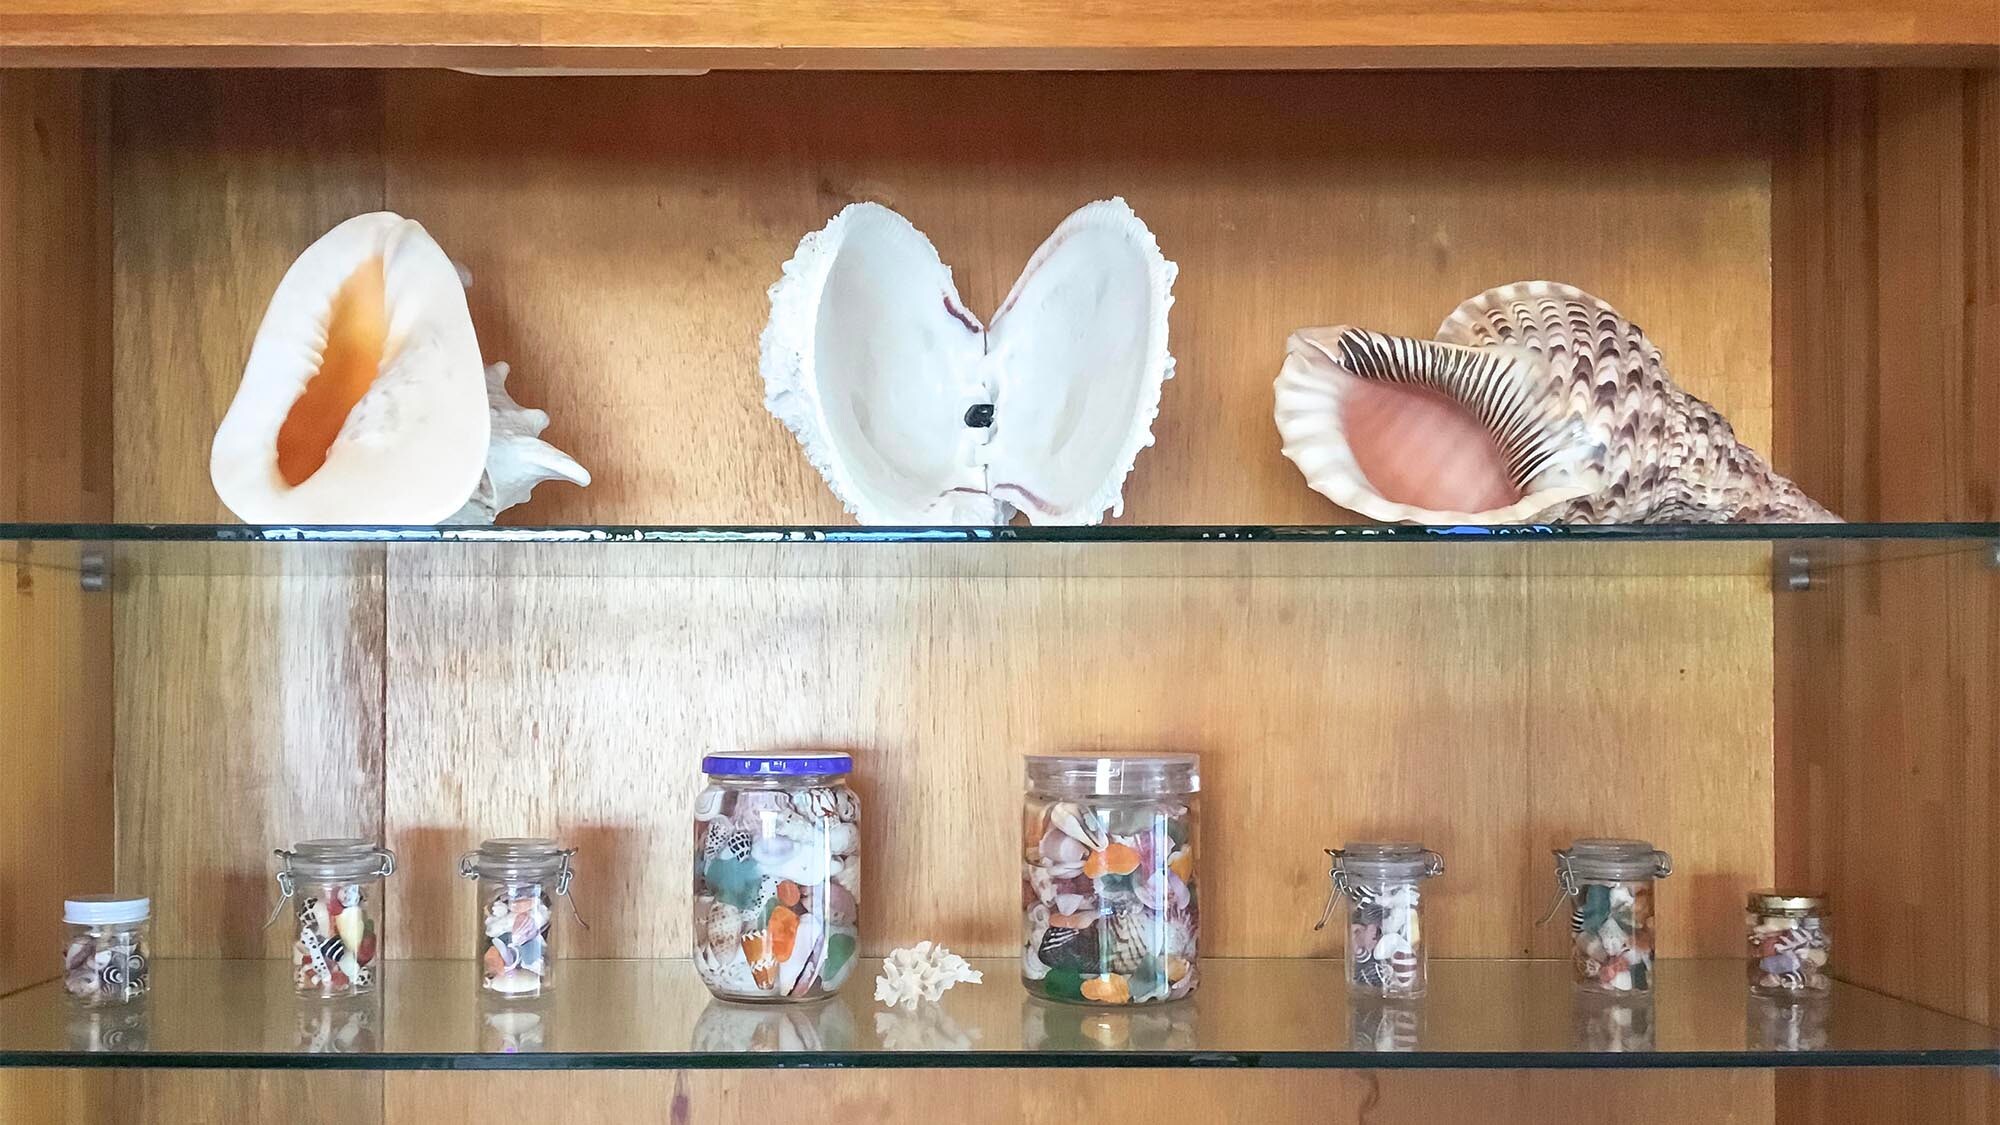 ・ [Deluxe Room] Seashell decoration that the owner is particular about